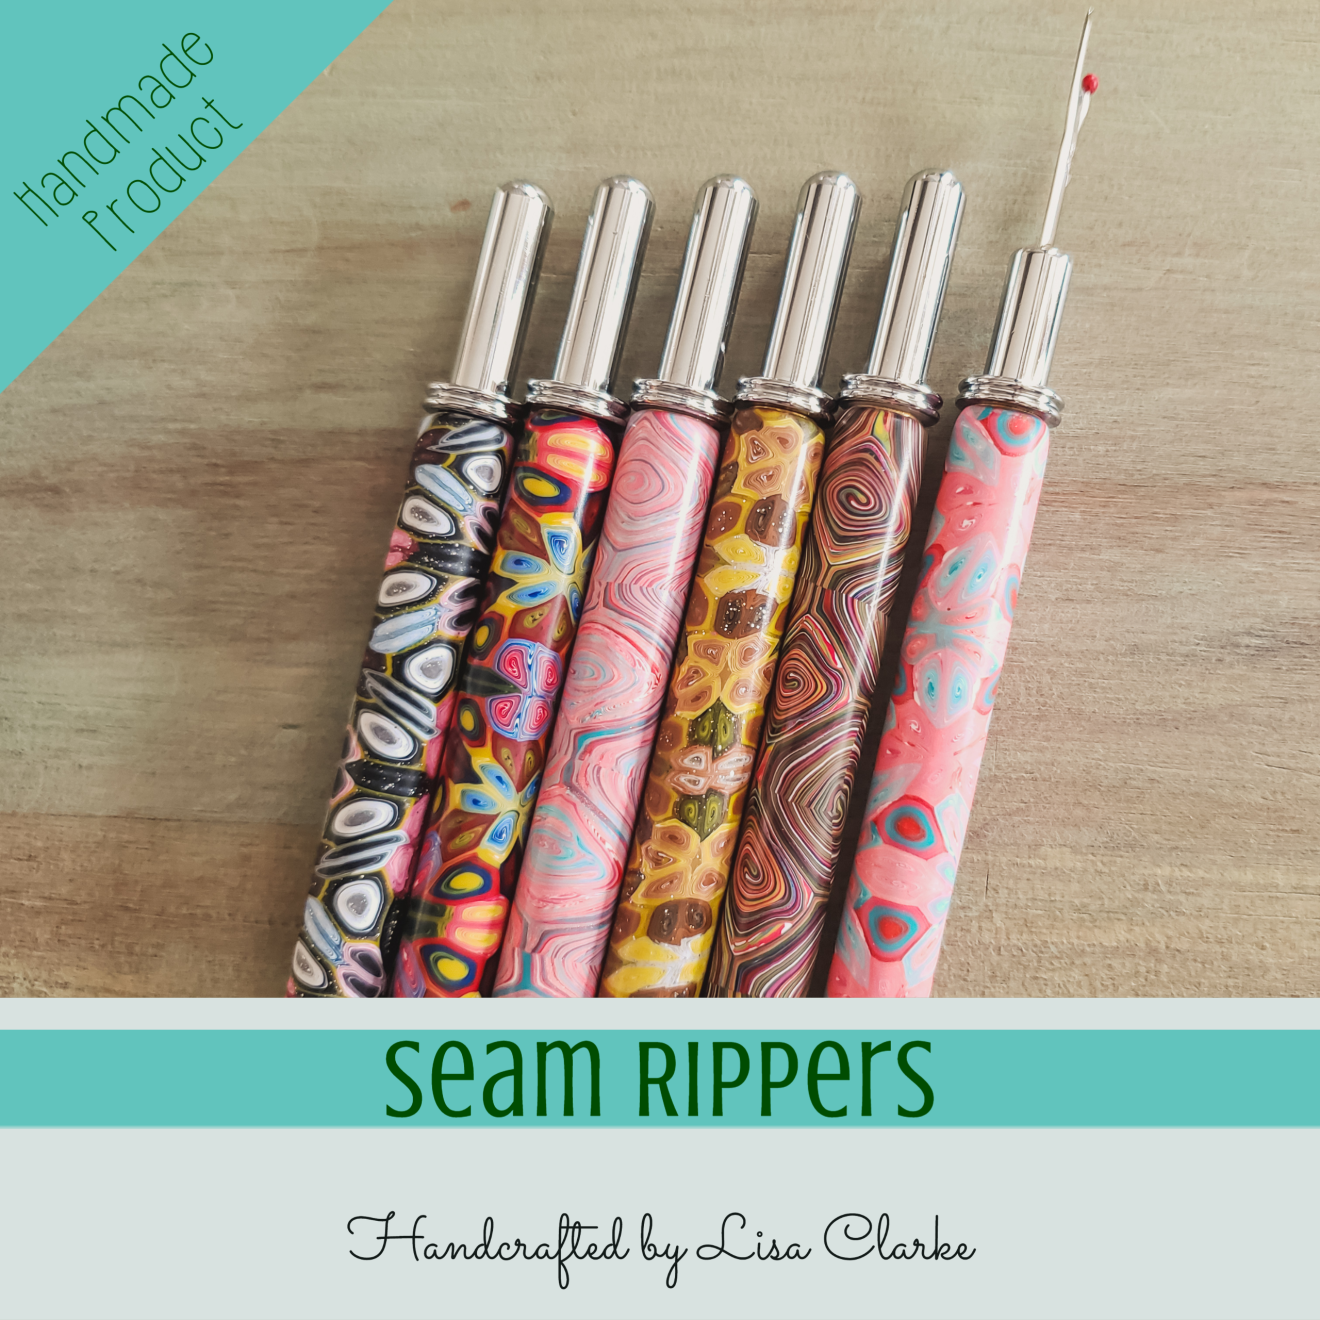 Seam Rippers by Lisa Clarke at Polka Dot Cottage